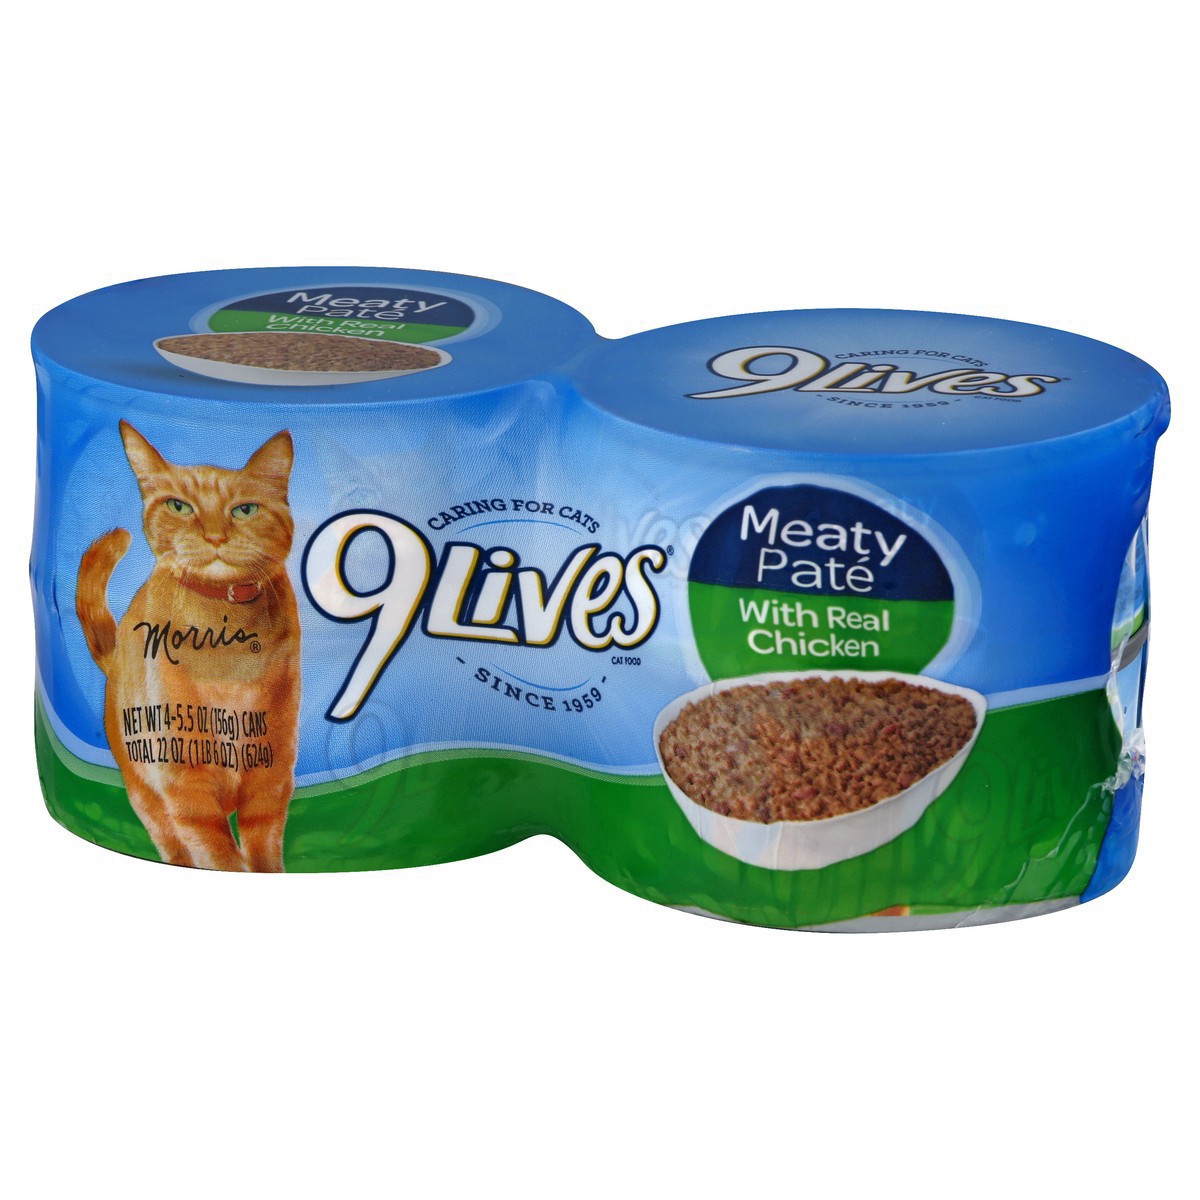 slide 7 of 10, 9Lives Cat Food, Meaty Paté w/ Real Chicken, 5.5 oz, 4 ct